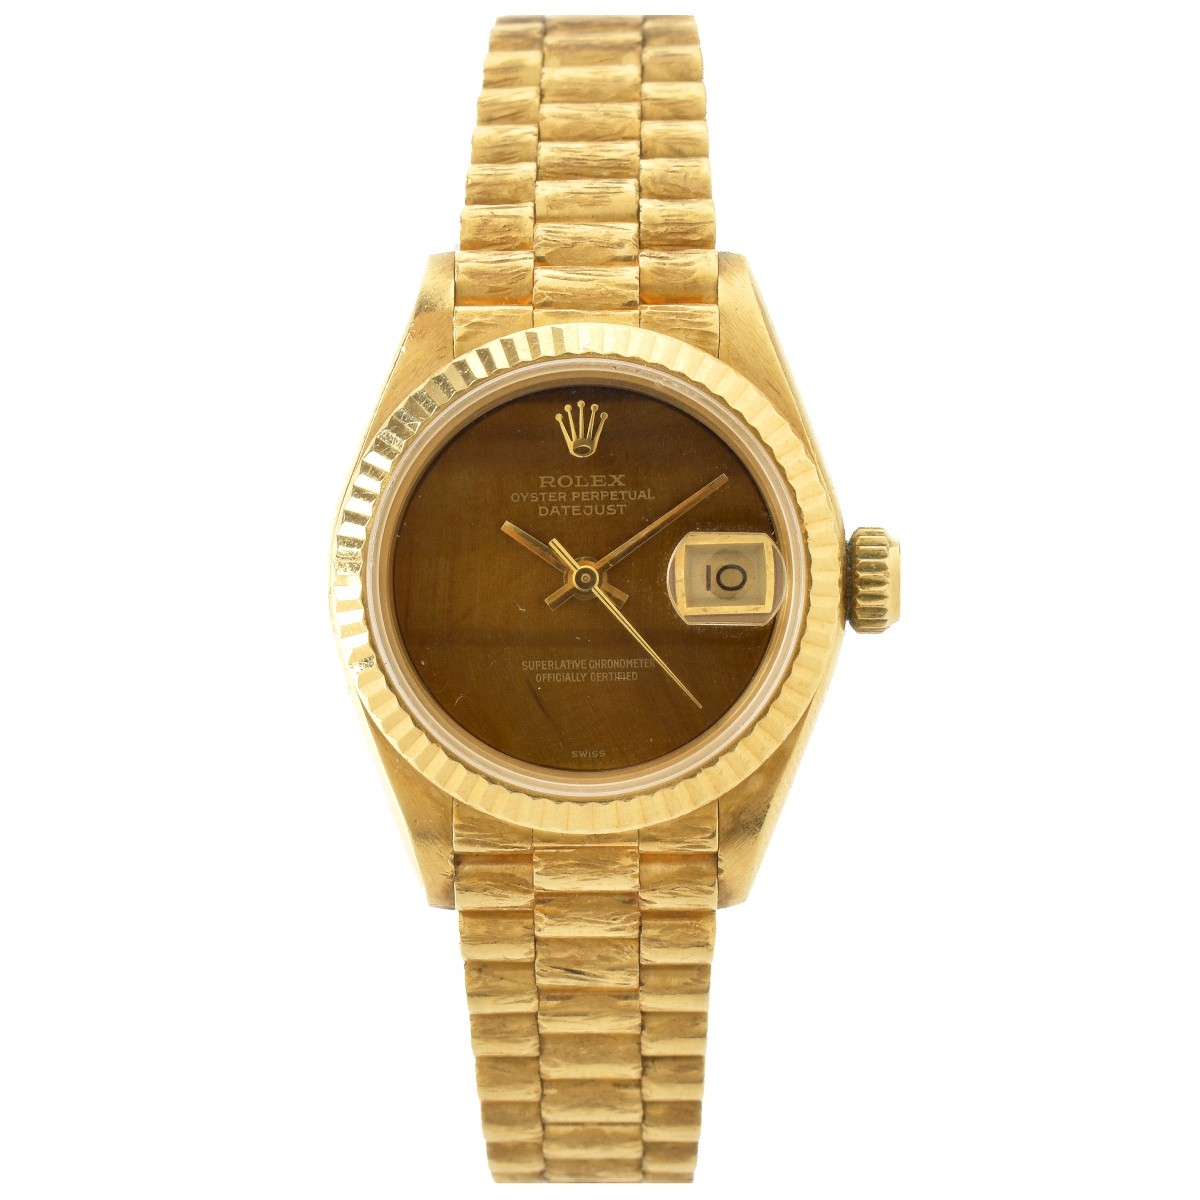 Lady's Rolex Oyster Perpetual Datejust 18K Watch